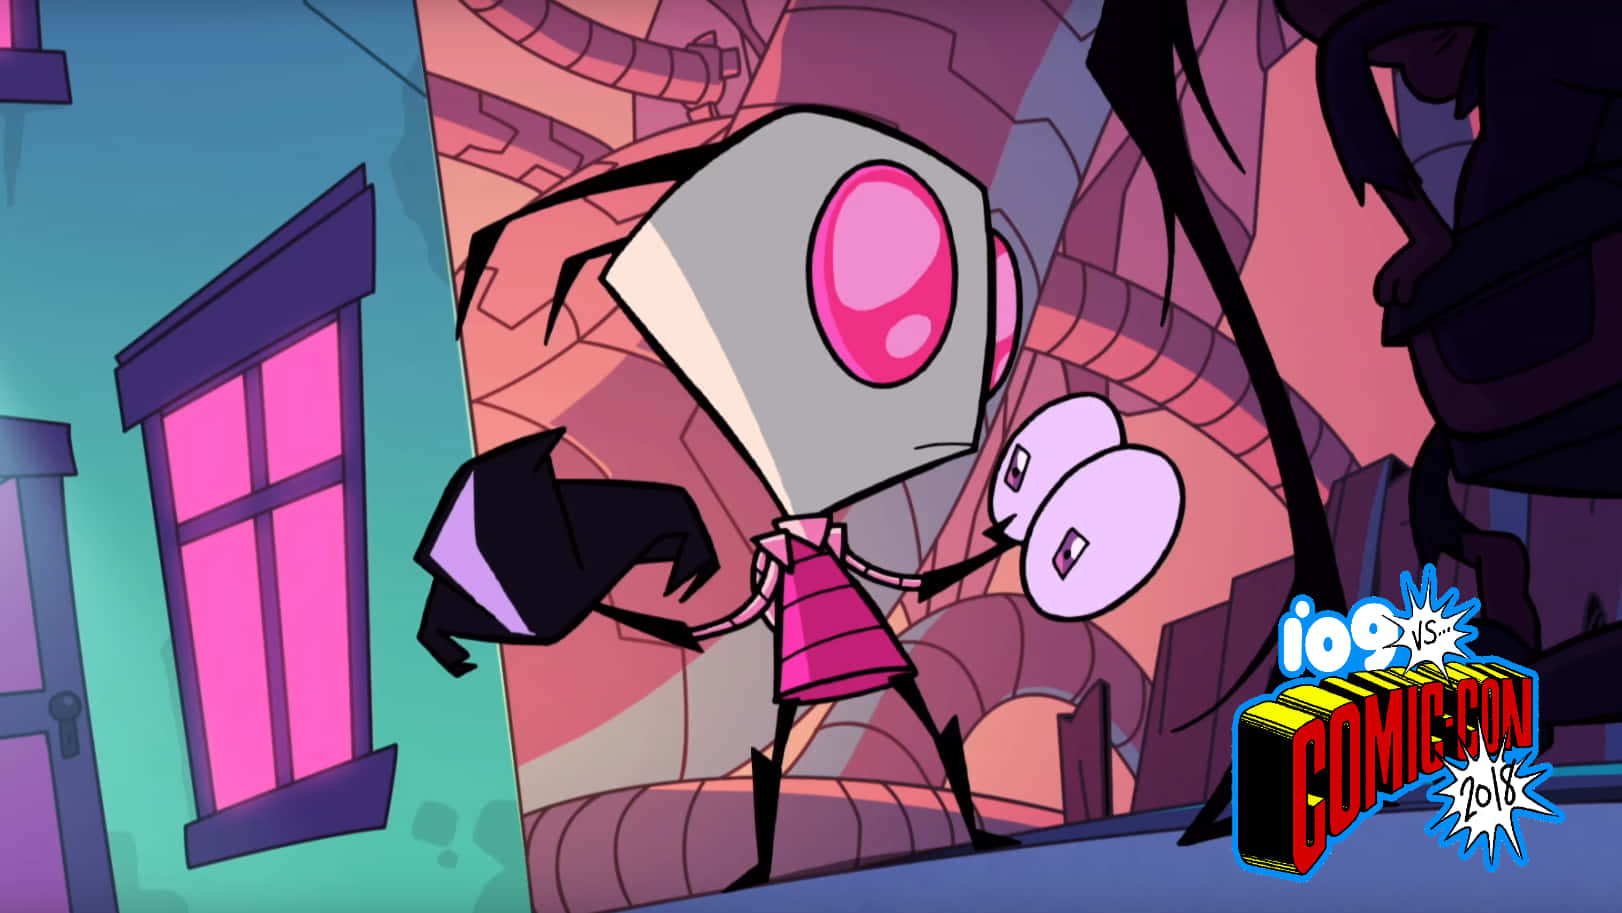 Invader Zim descends from his spaceship